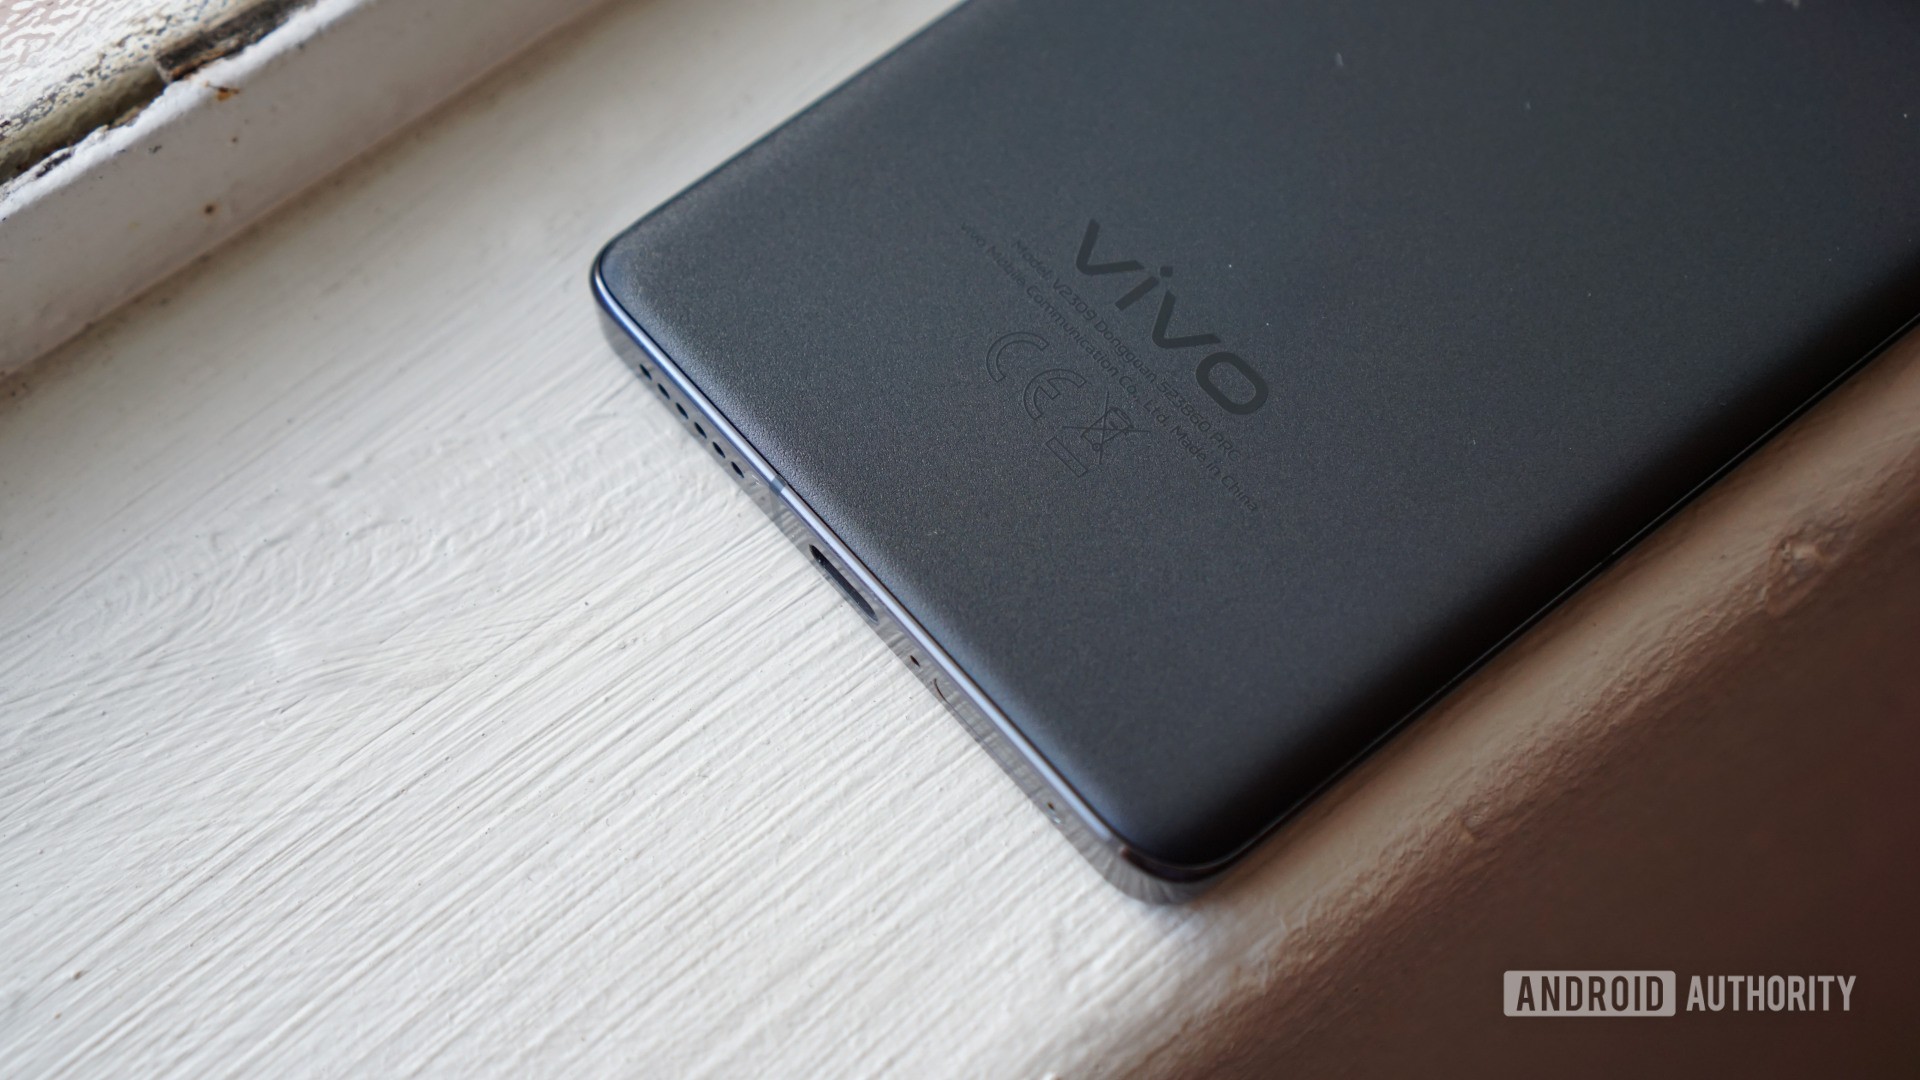 The Vivo X100 Pro with the company logo on the back.